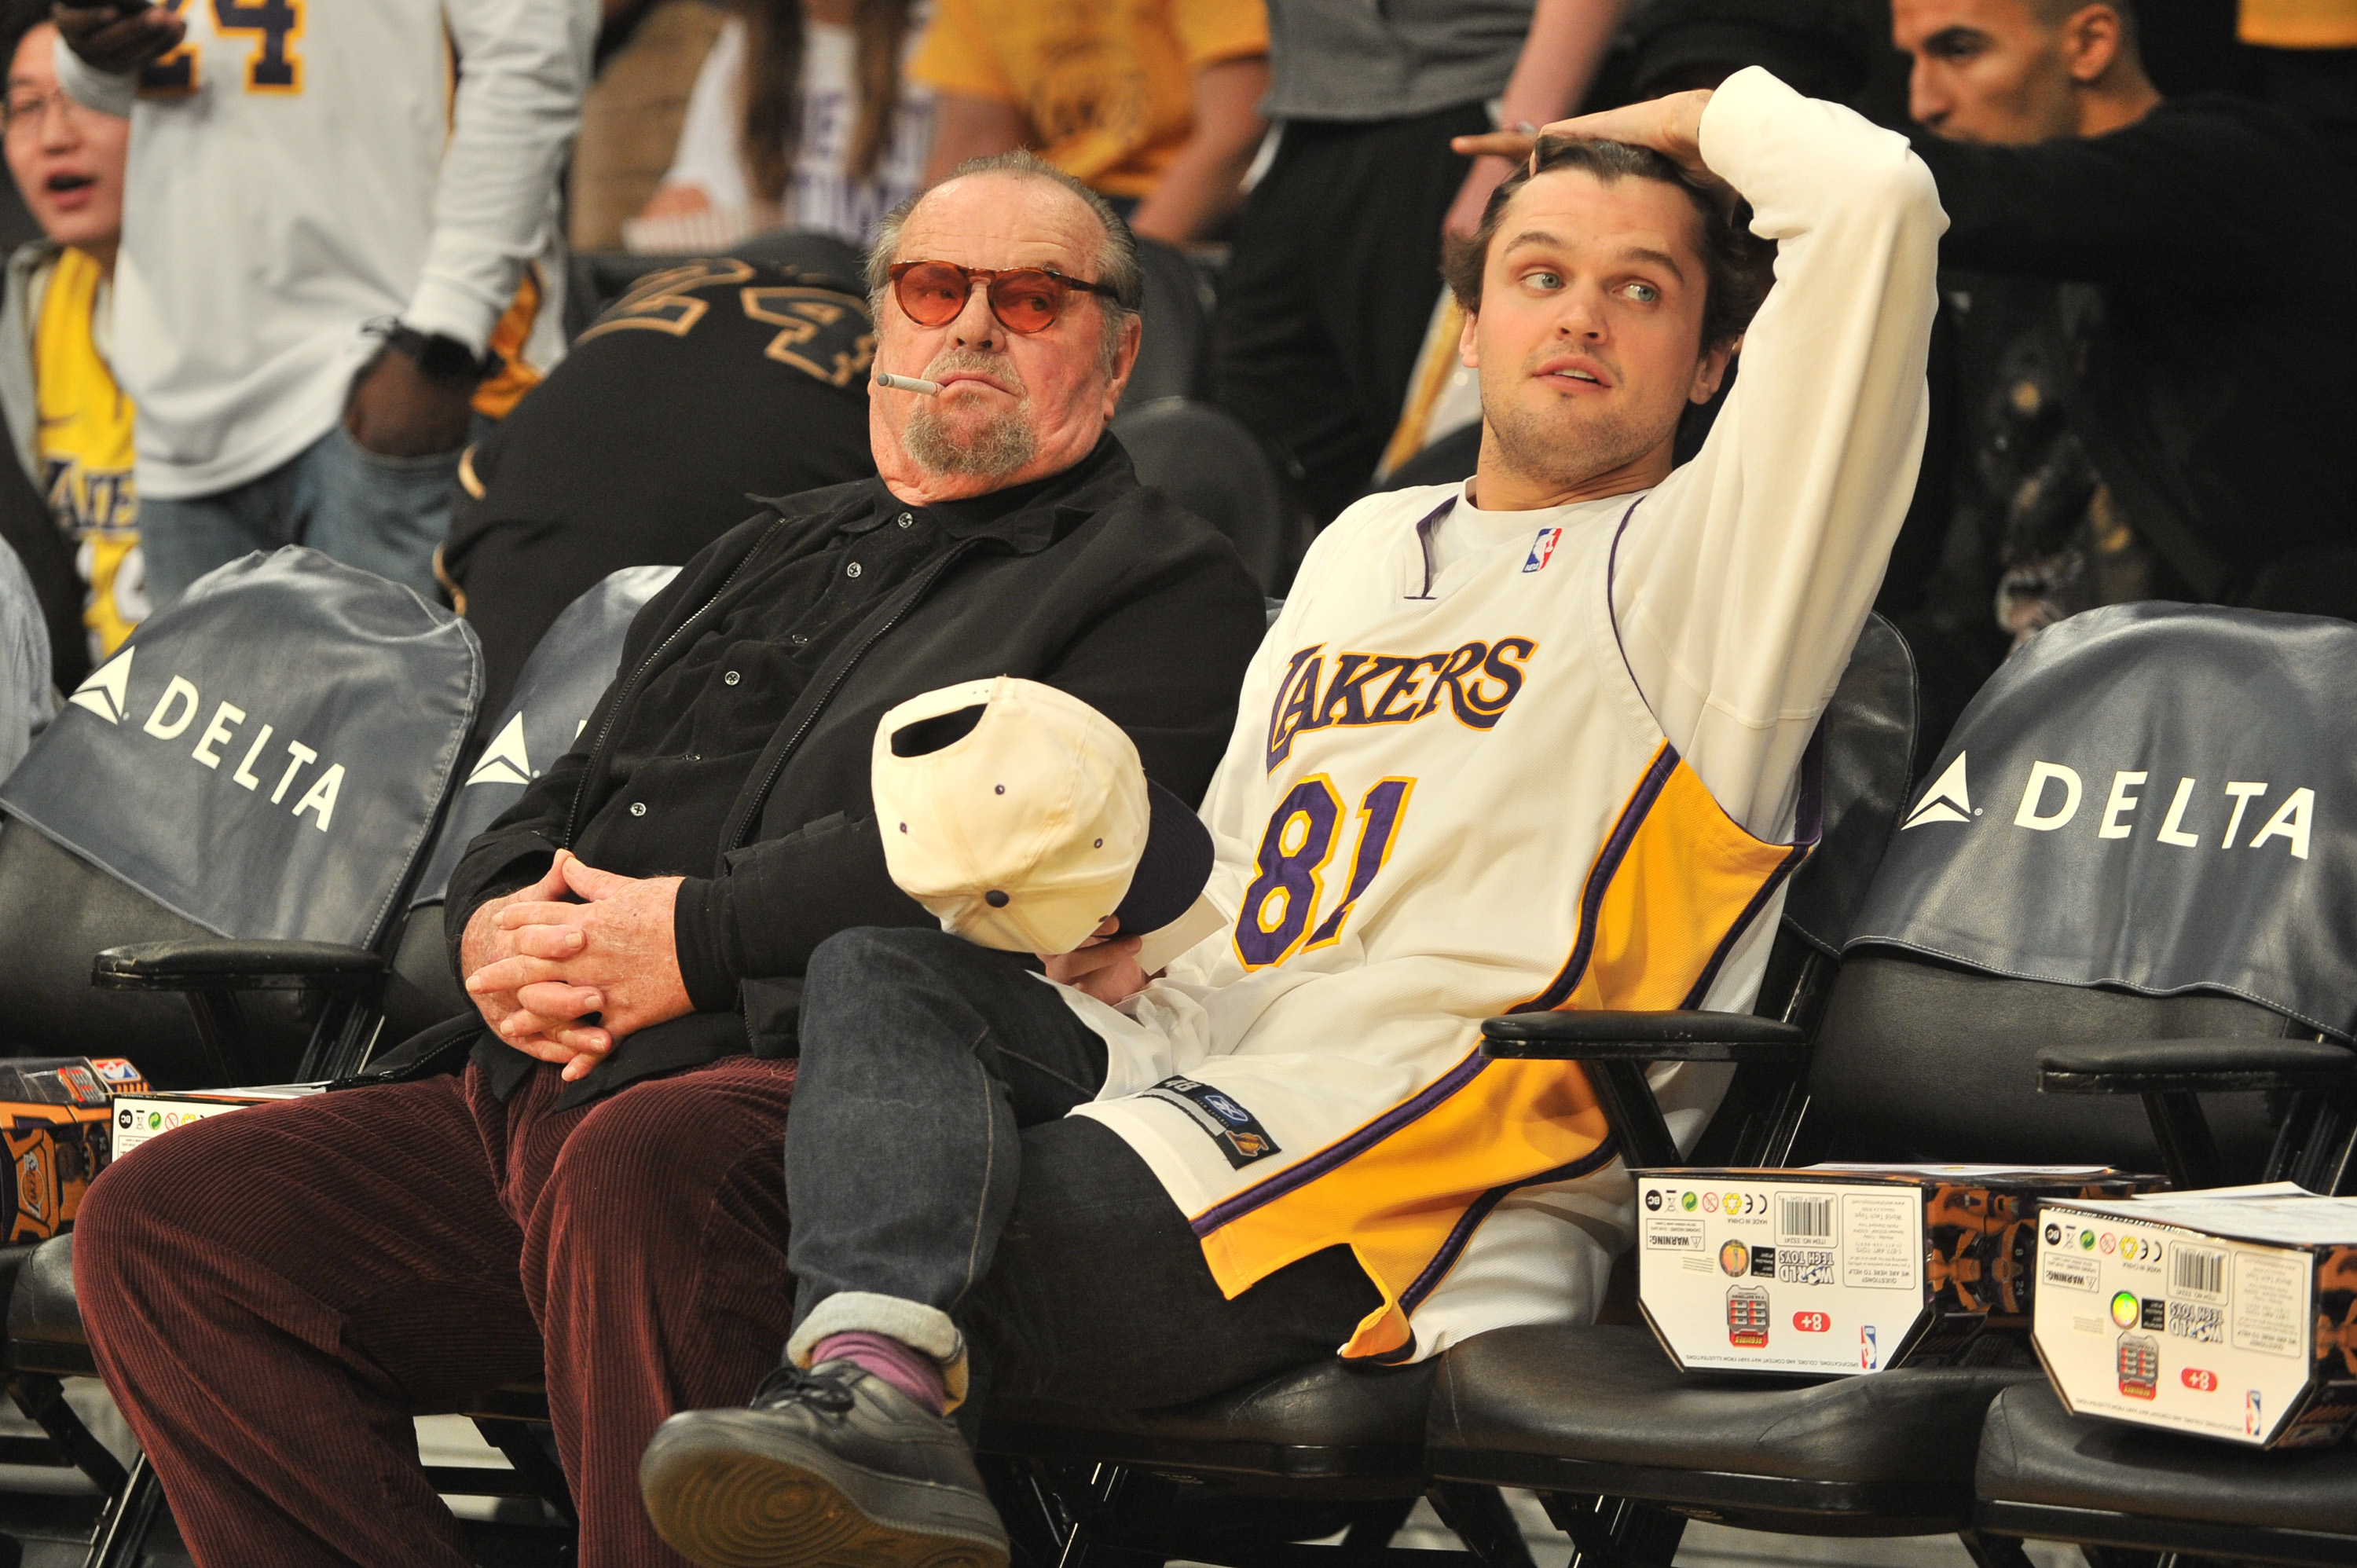 Jack Nicholson and Ray Nicholson at a basketball game between the Los Angeles Lakers and the Golden State Warriors in Los Angeles, California on December 18, 2017 | Source: Getty Images